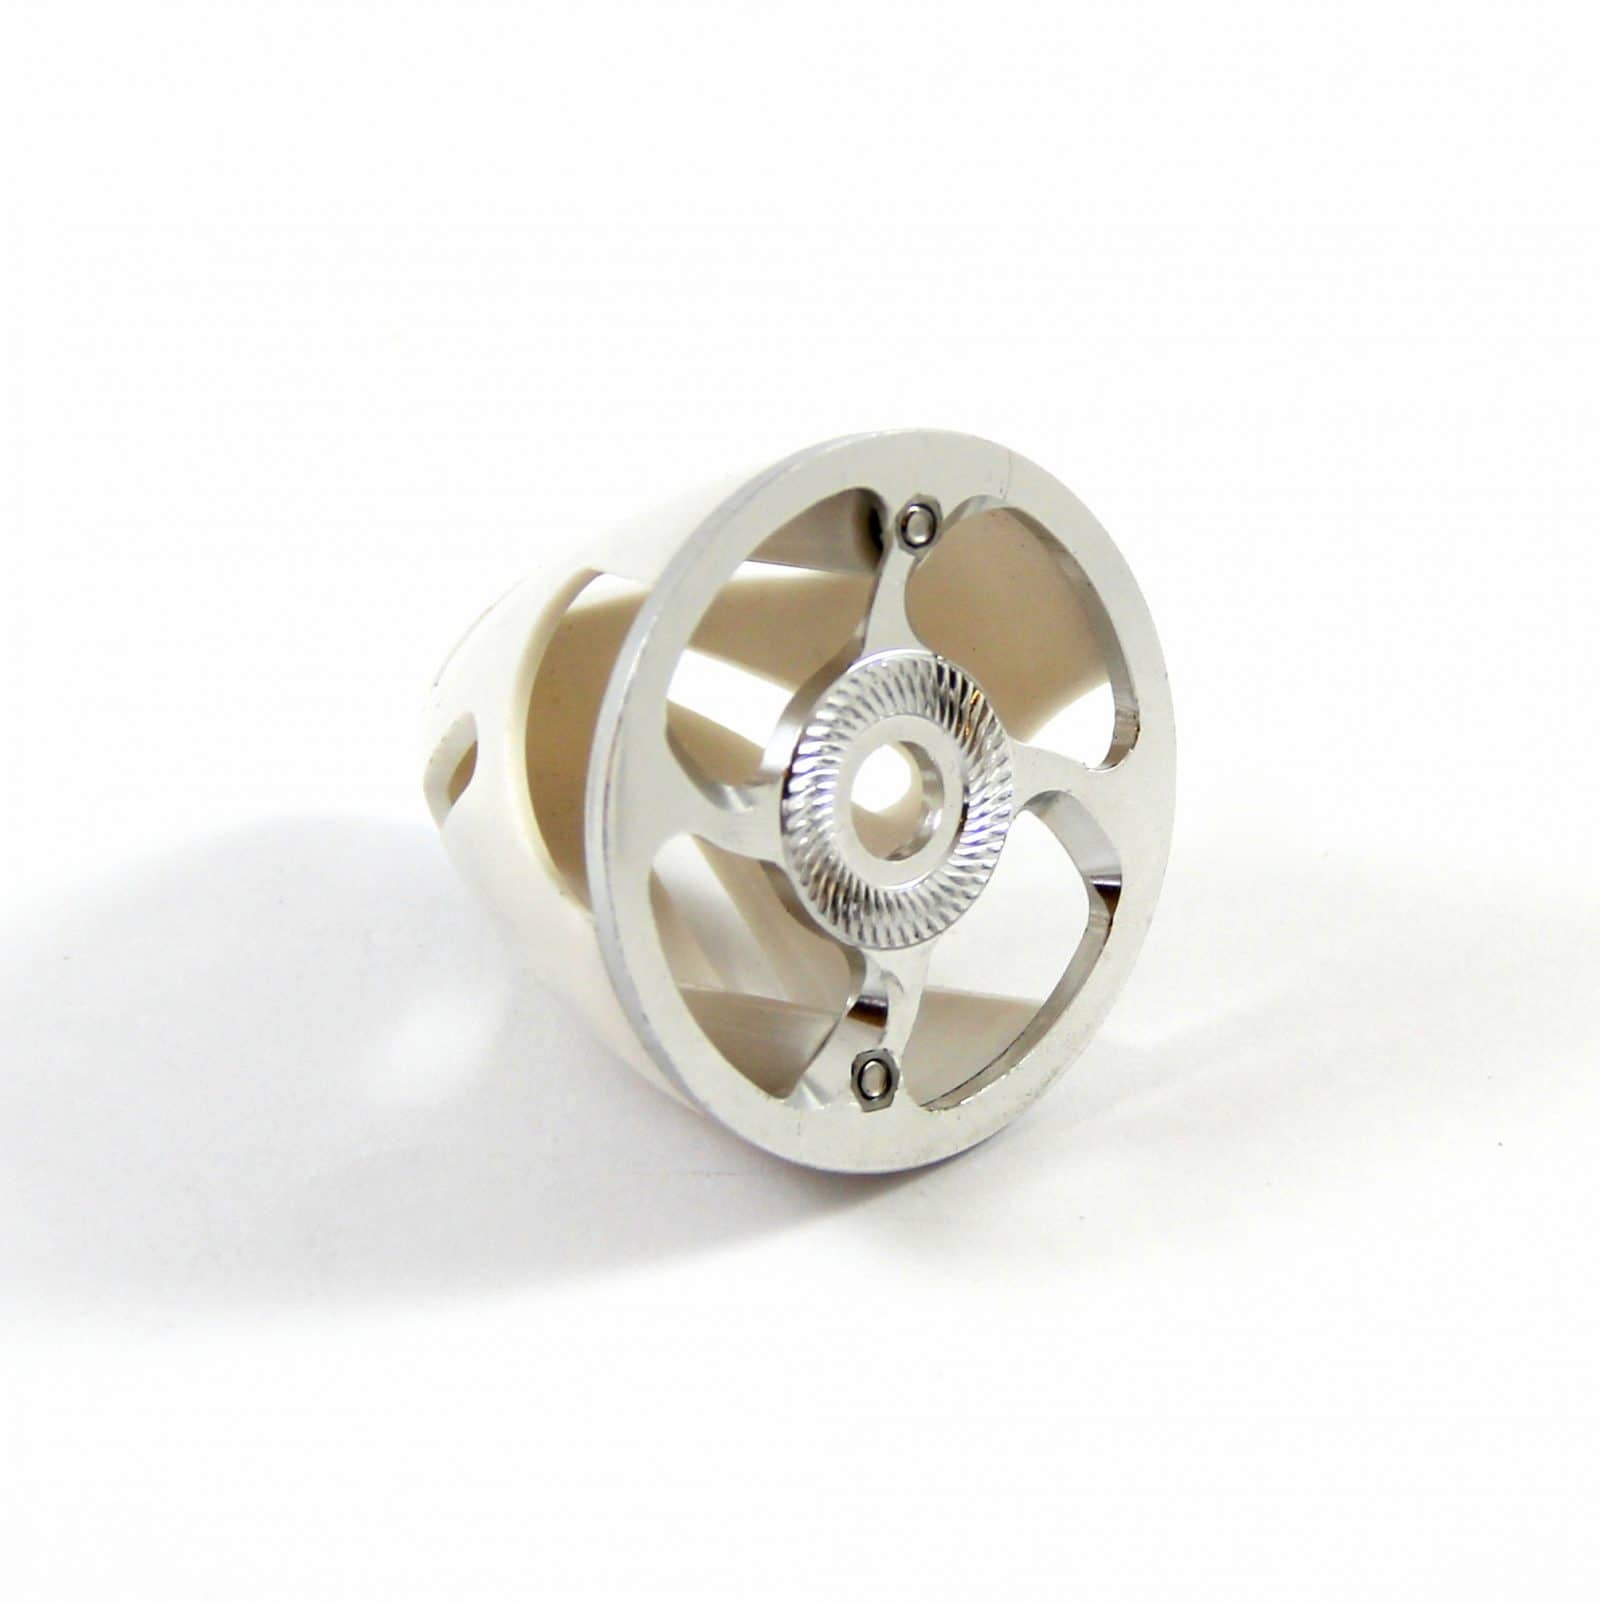 Kuza Vented Electric Spinner 2.25" / 57mm White KAG0202W